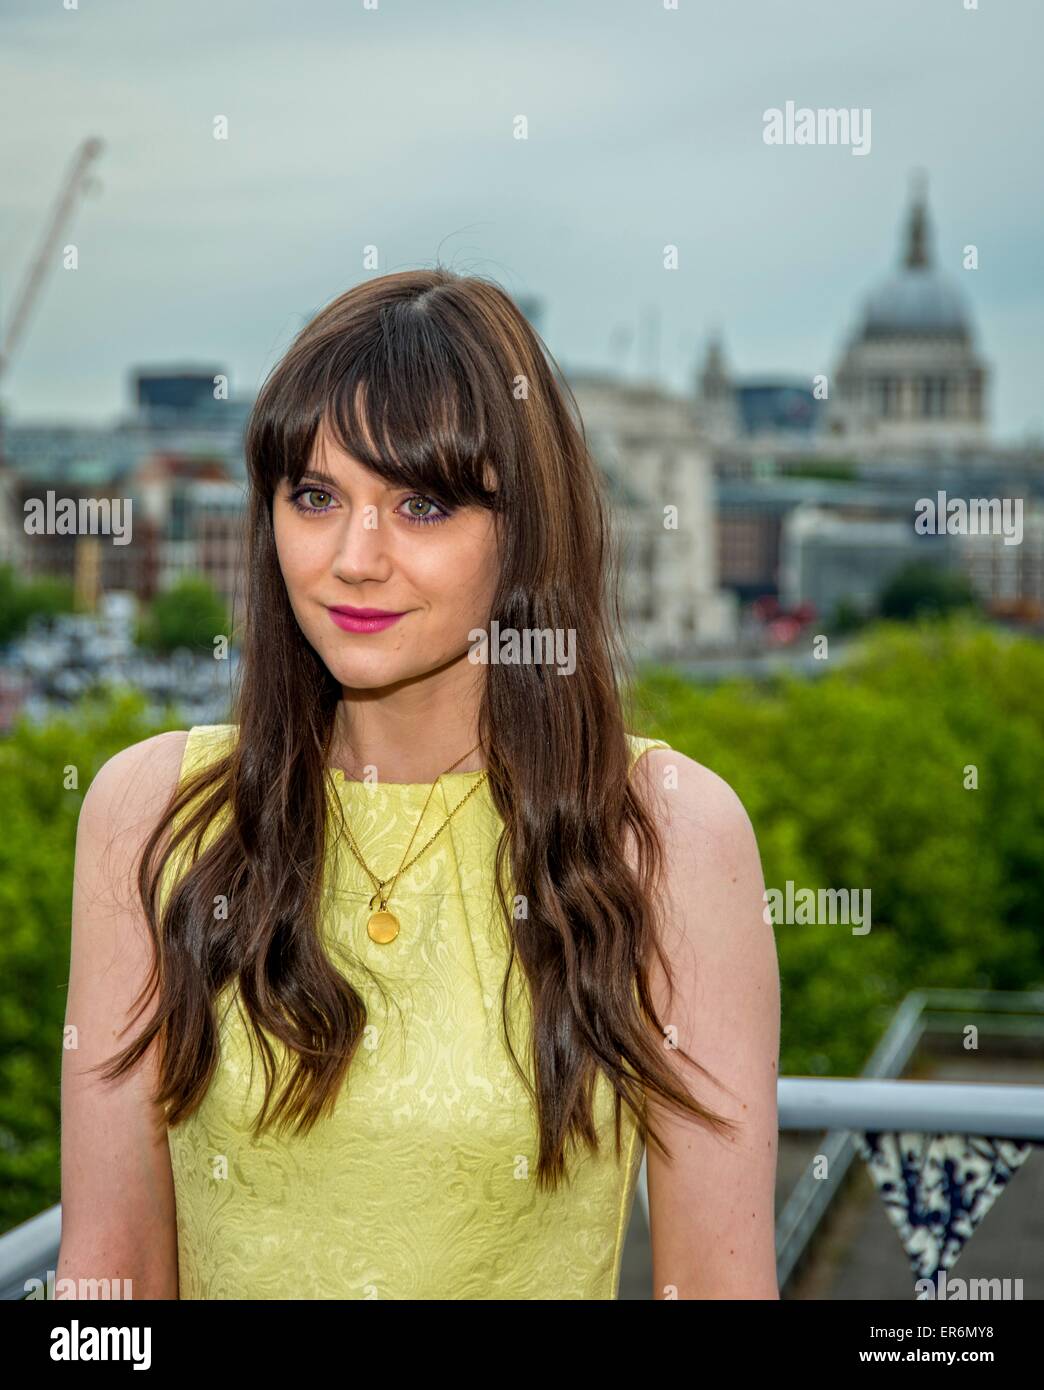 Lila Parsons attending the ‘Closet London Re-Brand Party’ Stock Photo